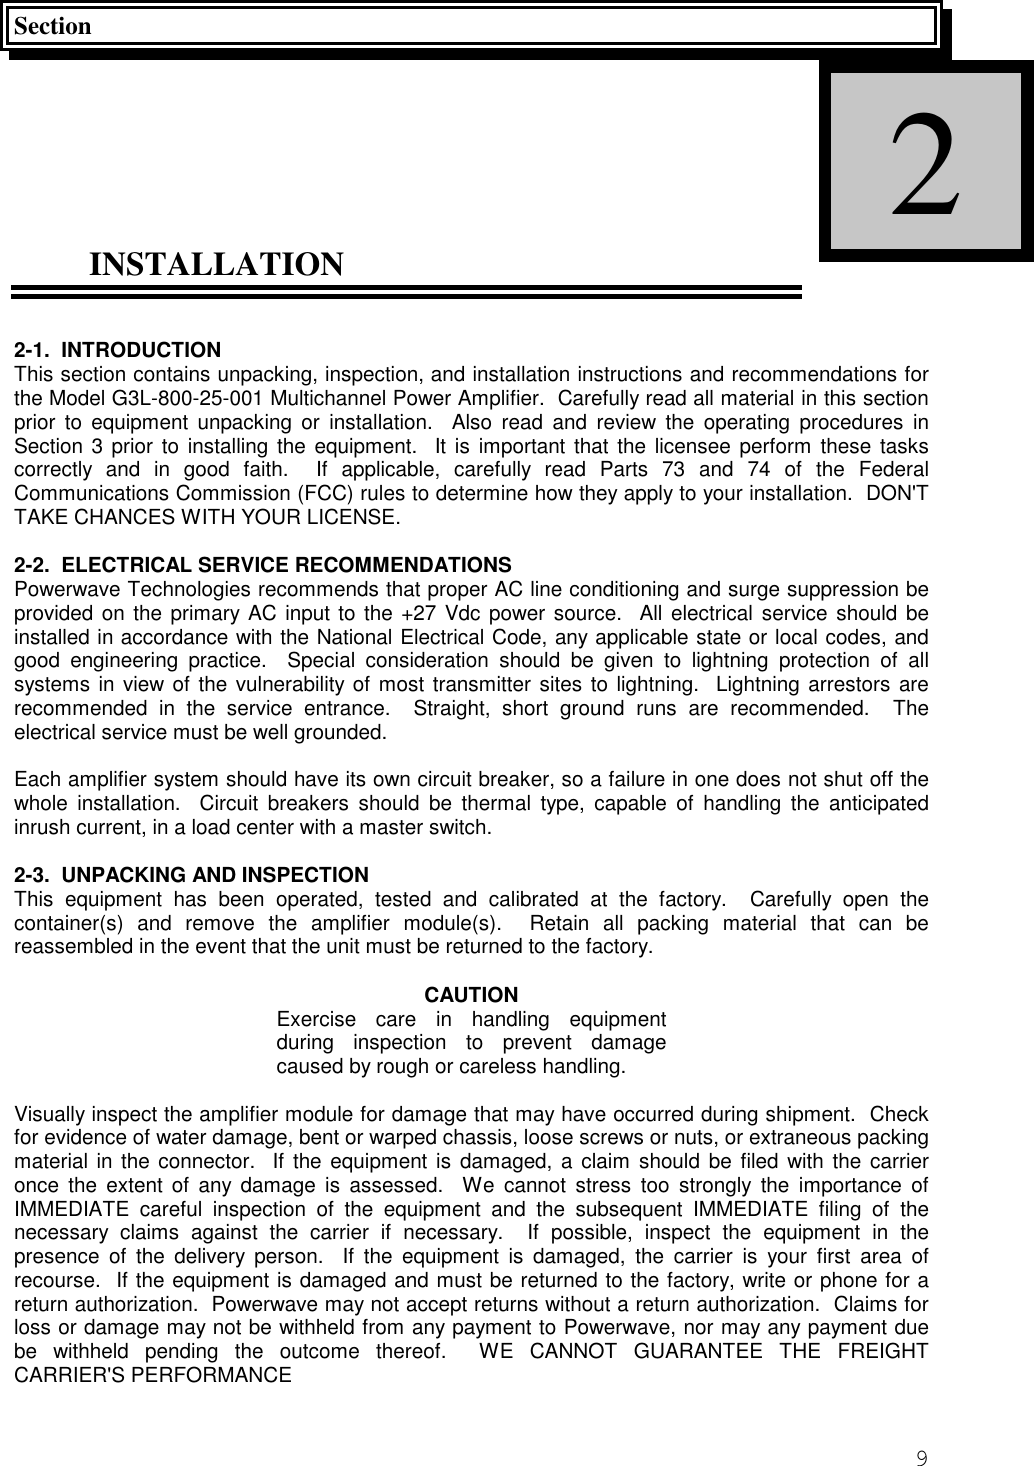 9SectionINSTALLATION2-1.  INTRODUCTIONThis section contains unpacking, inspection, and installation instructions and recommendations forthe Model G3L-800-25-001 Multichannel Power Amplifier.  Carefully read all material in this sectionprior to equipment unpacking or installation.  Also read and review the operating procedures inSection 3 prior to installing the equipment.  It is important that the licensee perform these taskscorrectly and in good faith.  If applicable, carefully read Parts 73 and 74 of the FederalCommunications Commission (FCC) rules to determine how they apply to your installation.  DON&apos;TTAKE CHANCES WITH YOUR LICENSE.2-2.  ELECTRICAL SERVICE RECOMMENDATIONSPowerwave Technologies recommends that proper AC line conditioning and surge suppression beprovided on the primary AC input to the +27 Vdc power source.  All electrical service should beinstalled in accordance with the National Electrical Code, any applicable state or local codes, andgood engineering practice.  Special consideration should be given to lightning protection of allsystems in view of the vulnerability of most transmitter sites to lightning.  Lightning arrestors arerecommended in the service entrance.  Straight, short ground runs are recommended.  Theelectrical service must be well grounded.Each amplifier system should have its own circuit breaker, so a failure in one does not shut off thewhole installation.  Circuit breakers should be thermal type, capable of handling the anticipatedinrush current, in a load center with a master switch.2-3.  UNPACKING AND INSPECTIONThis equipment has been operated, tested and calibrated at the factory.  Carefully open thecontainer(s) and remove the amplifier module(s).  Retain all packing material that can bereassembled in the event that the unit must be returned to the factory.CAUTIONExercise care in handling equipmentduring inspection to prevent damagecaused by rough or careless handling.Visually inspect the amplifier module for damage that may have occurred during shipment.  Checkfor evidence of water damage, bent or warped chassis, loose screws or nuts, or extraneous packingmaterial in the connector.  If the equipment is damaged, a claim should be filed with the carrieronce the extent of any damage is assessed.  We cannot stress too strongly the importance ofIMMEDIATE careful inspection of the equipment and the subsequent IMMEDIATE filing of thenecessary claims against the carrier if necessary.  If possible, inspect the equipment in thepresence of the delivery person.  If the equipment is damaged, the carrier is your first area ofrecourse.  If the equipment is damaged and must be returned to the factory, write or phone for areturn authorization.  Powerwave may not accept returns without a return authorization.  Claims forloss or damage may not be withheld from any payment to Powerwave, nor may any payment duebe withheld pending the outcome thereof.  WE CANNOT GUARANTEE THE FREIGHTCARRIER&apos;S PERFORMANCE2